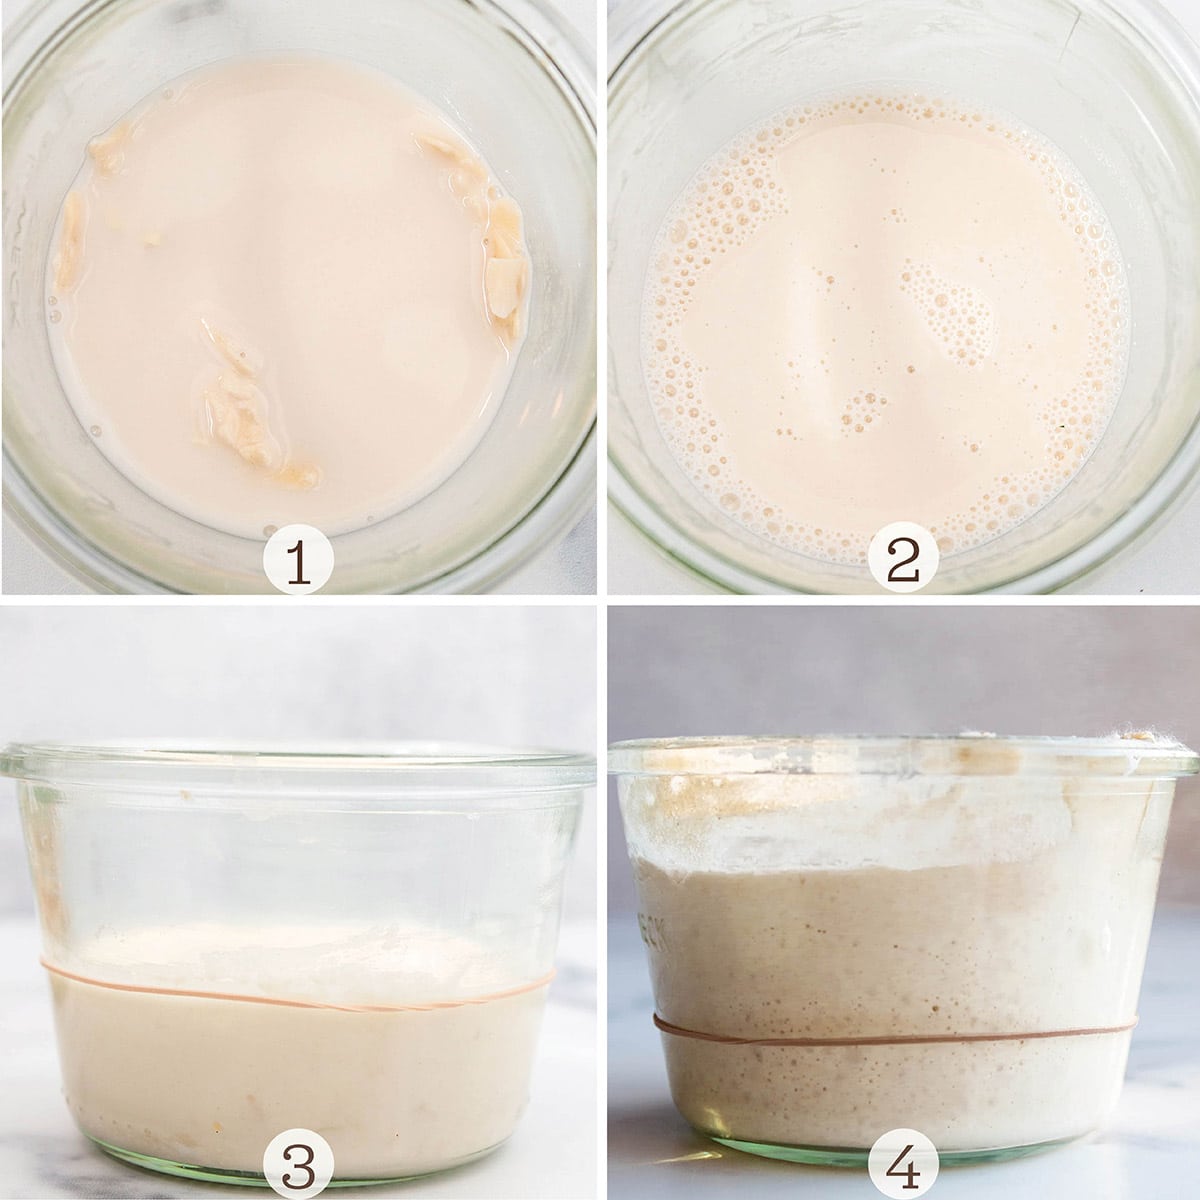 Four images of rehydrating dried sourdough starter.